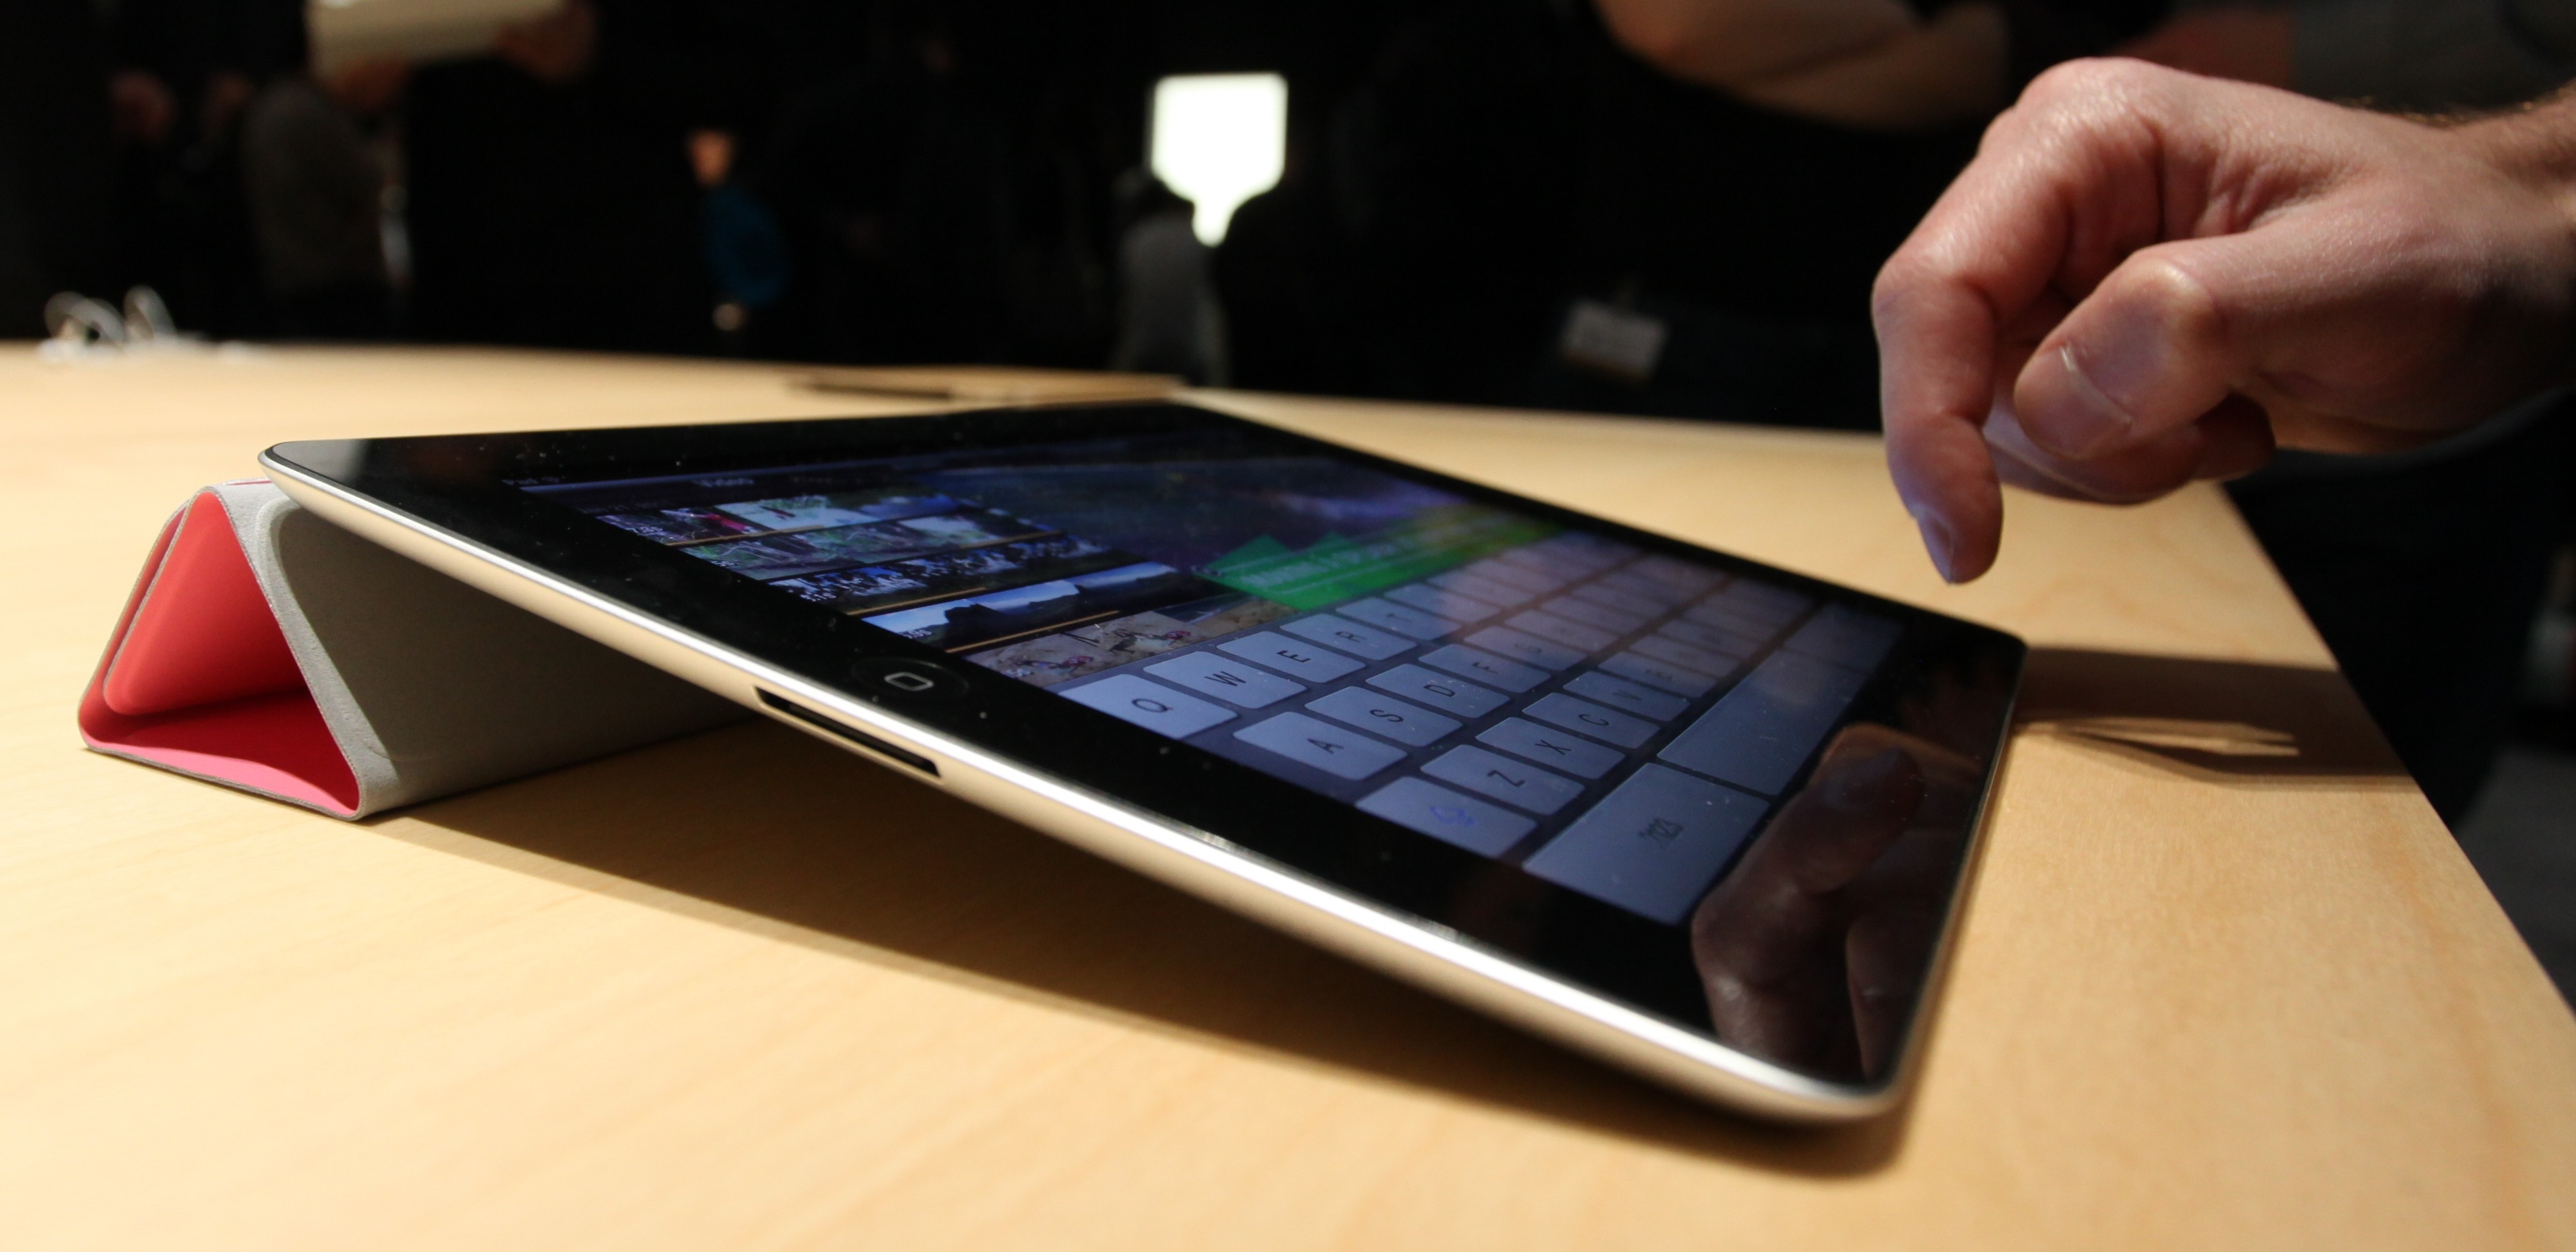 IPad_2_Smart_Cover_at_unveiling_crop.jpg